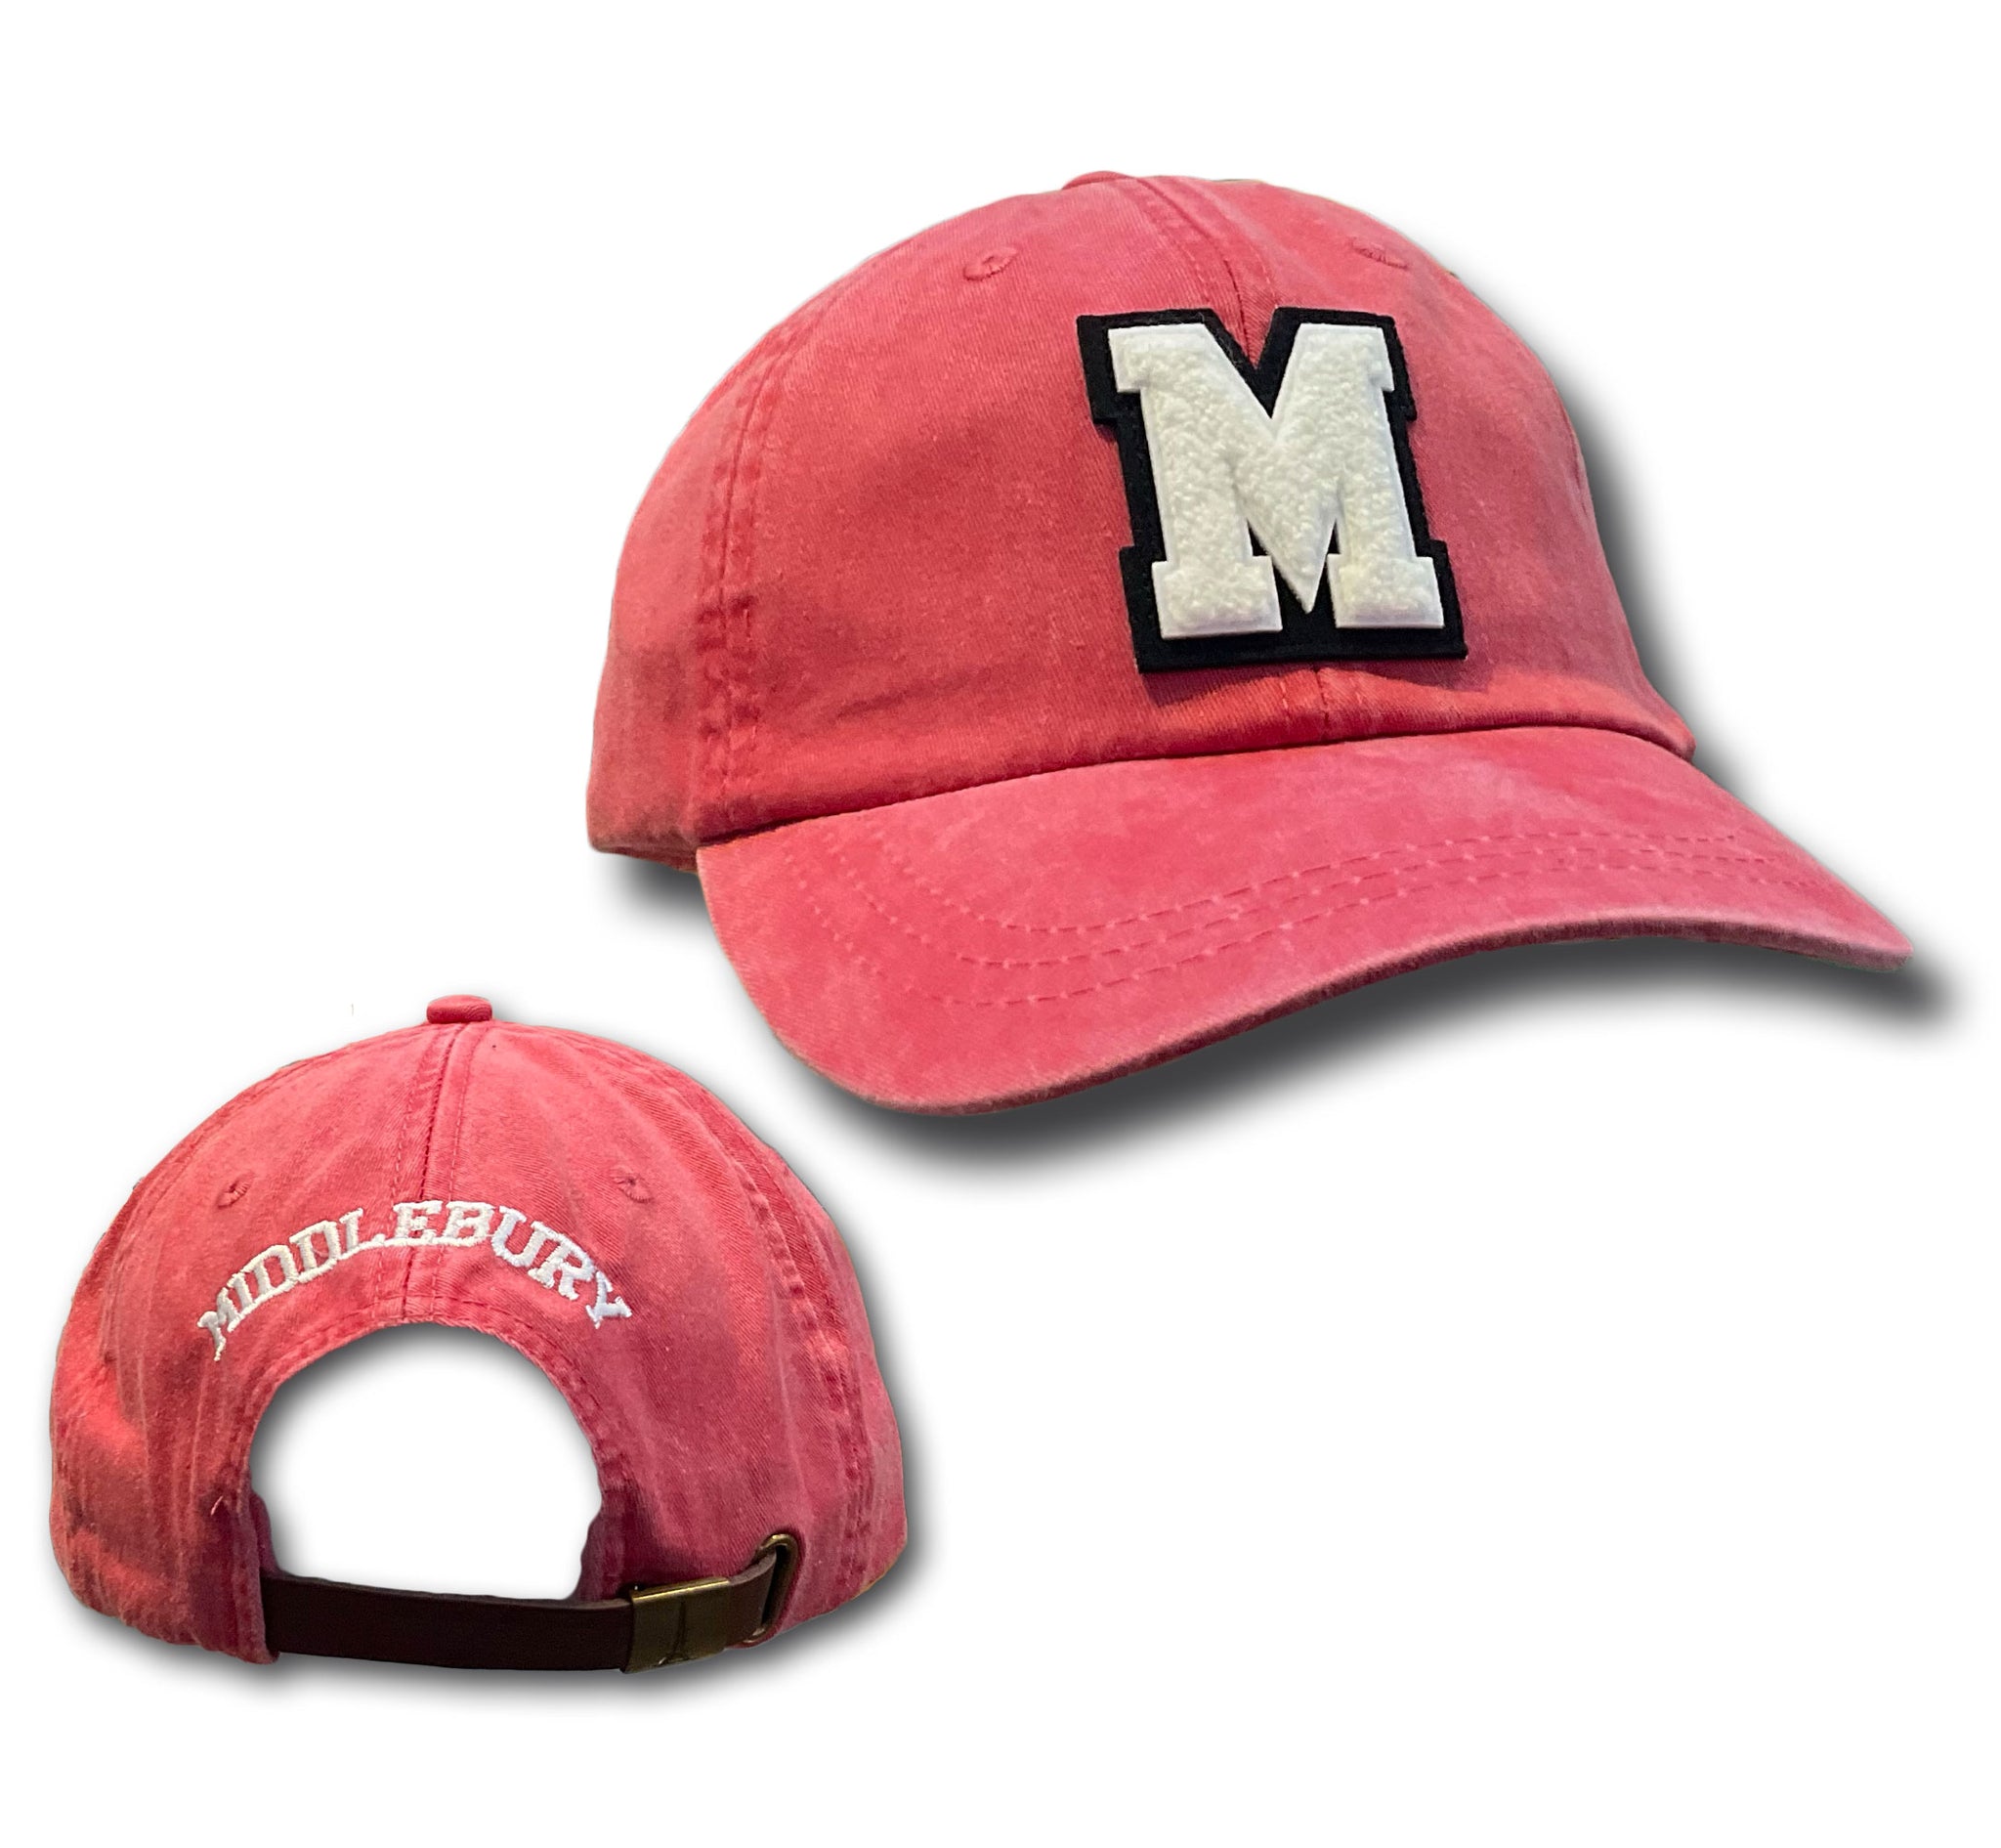 Middlebury Summer Hat (Nantucket Red)